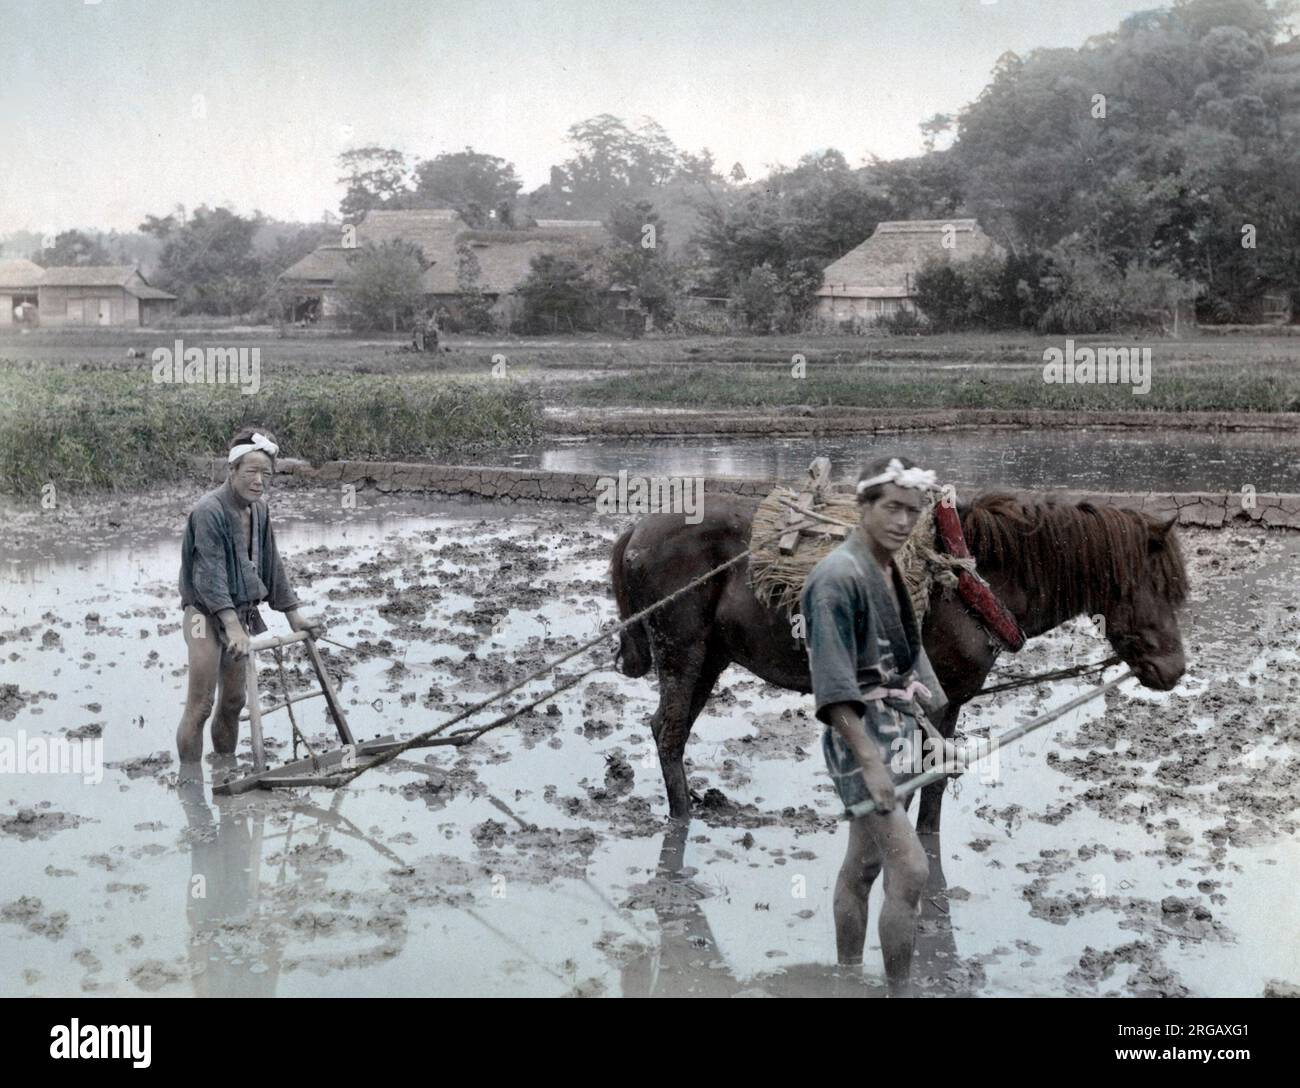 Farmers ploughing a rice paddy field with a horse, Japan, c.1880's Vintage late 19th century photograph Stock Photo